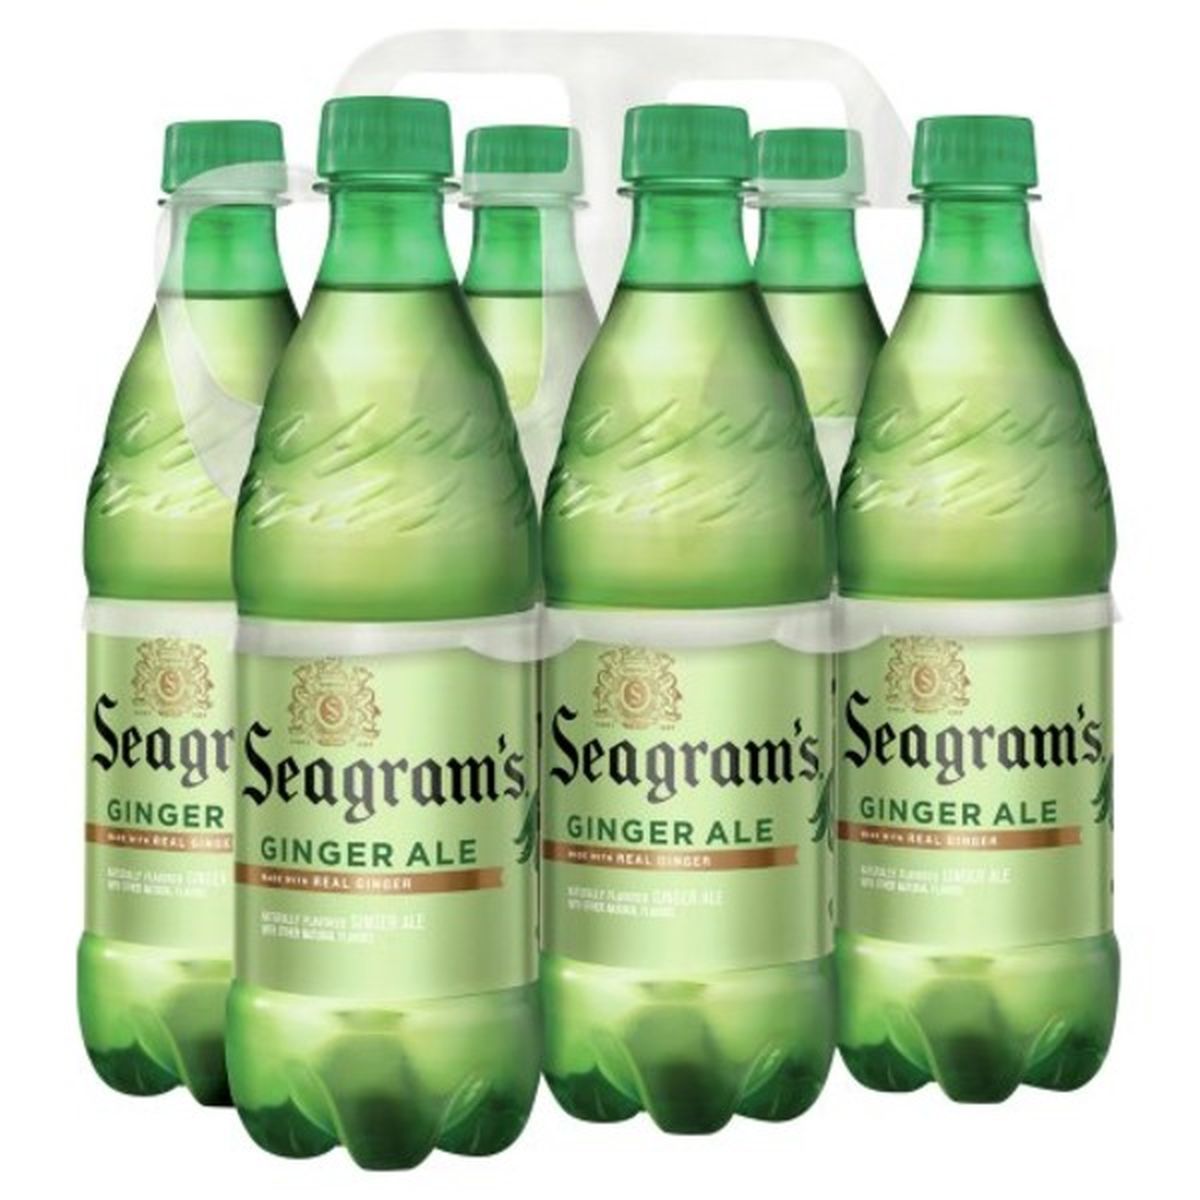 Calories in Seagram's Ginger Ale